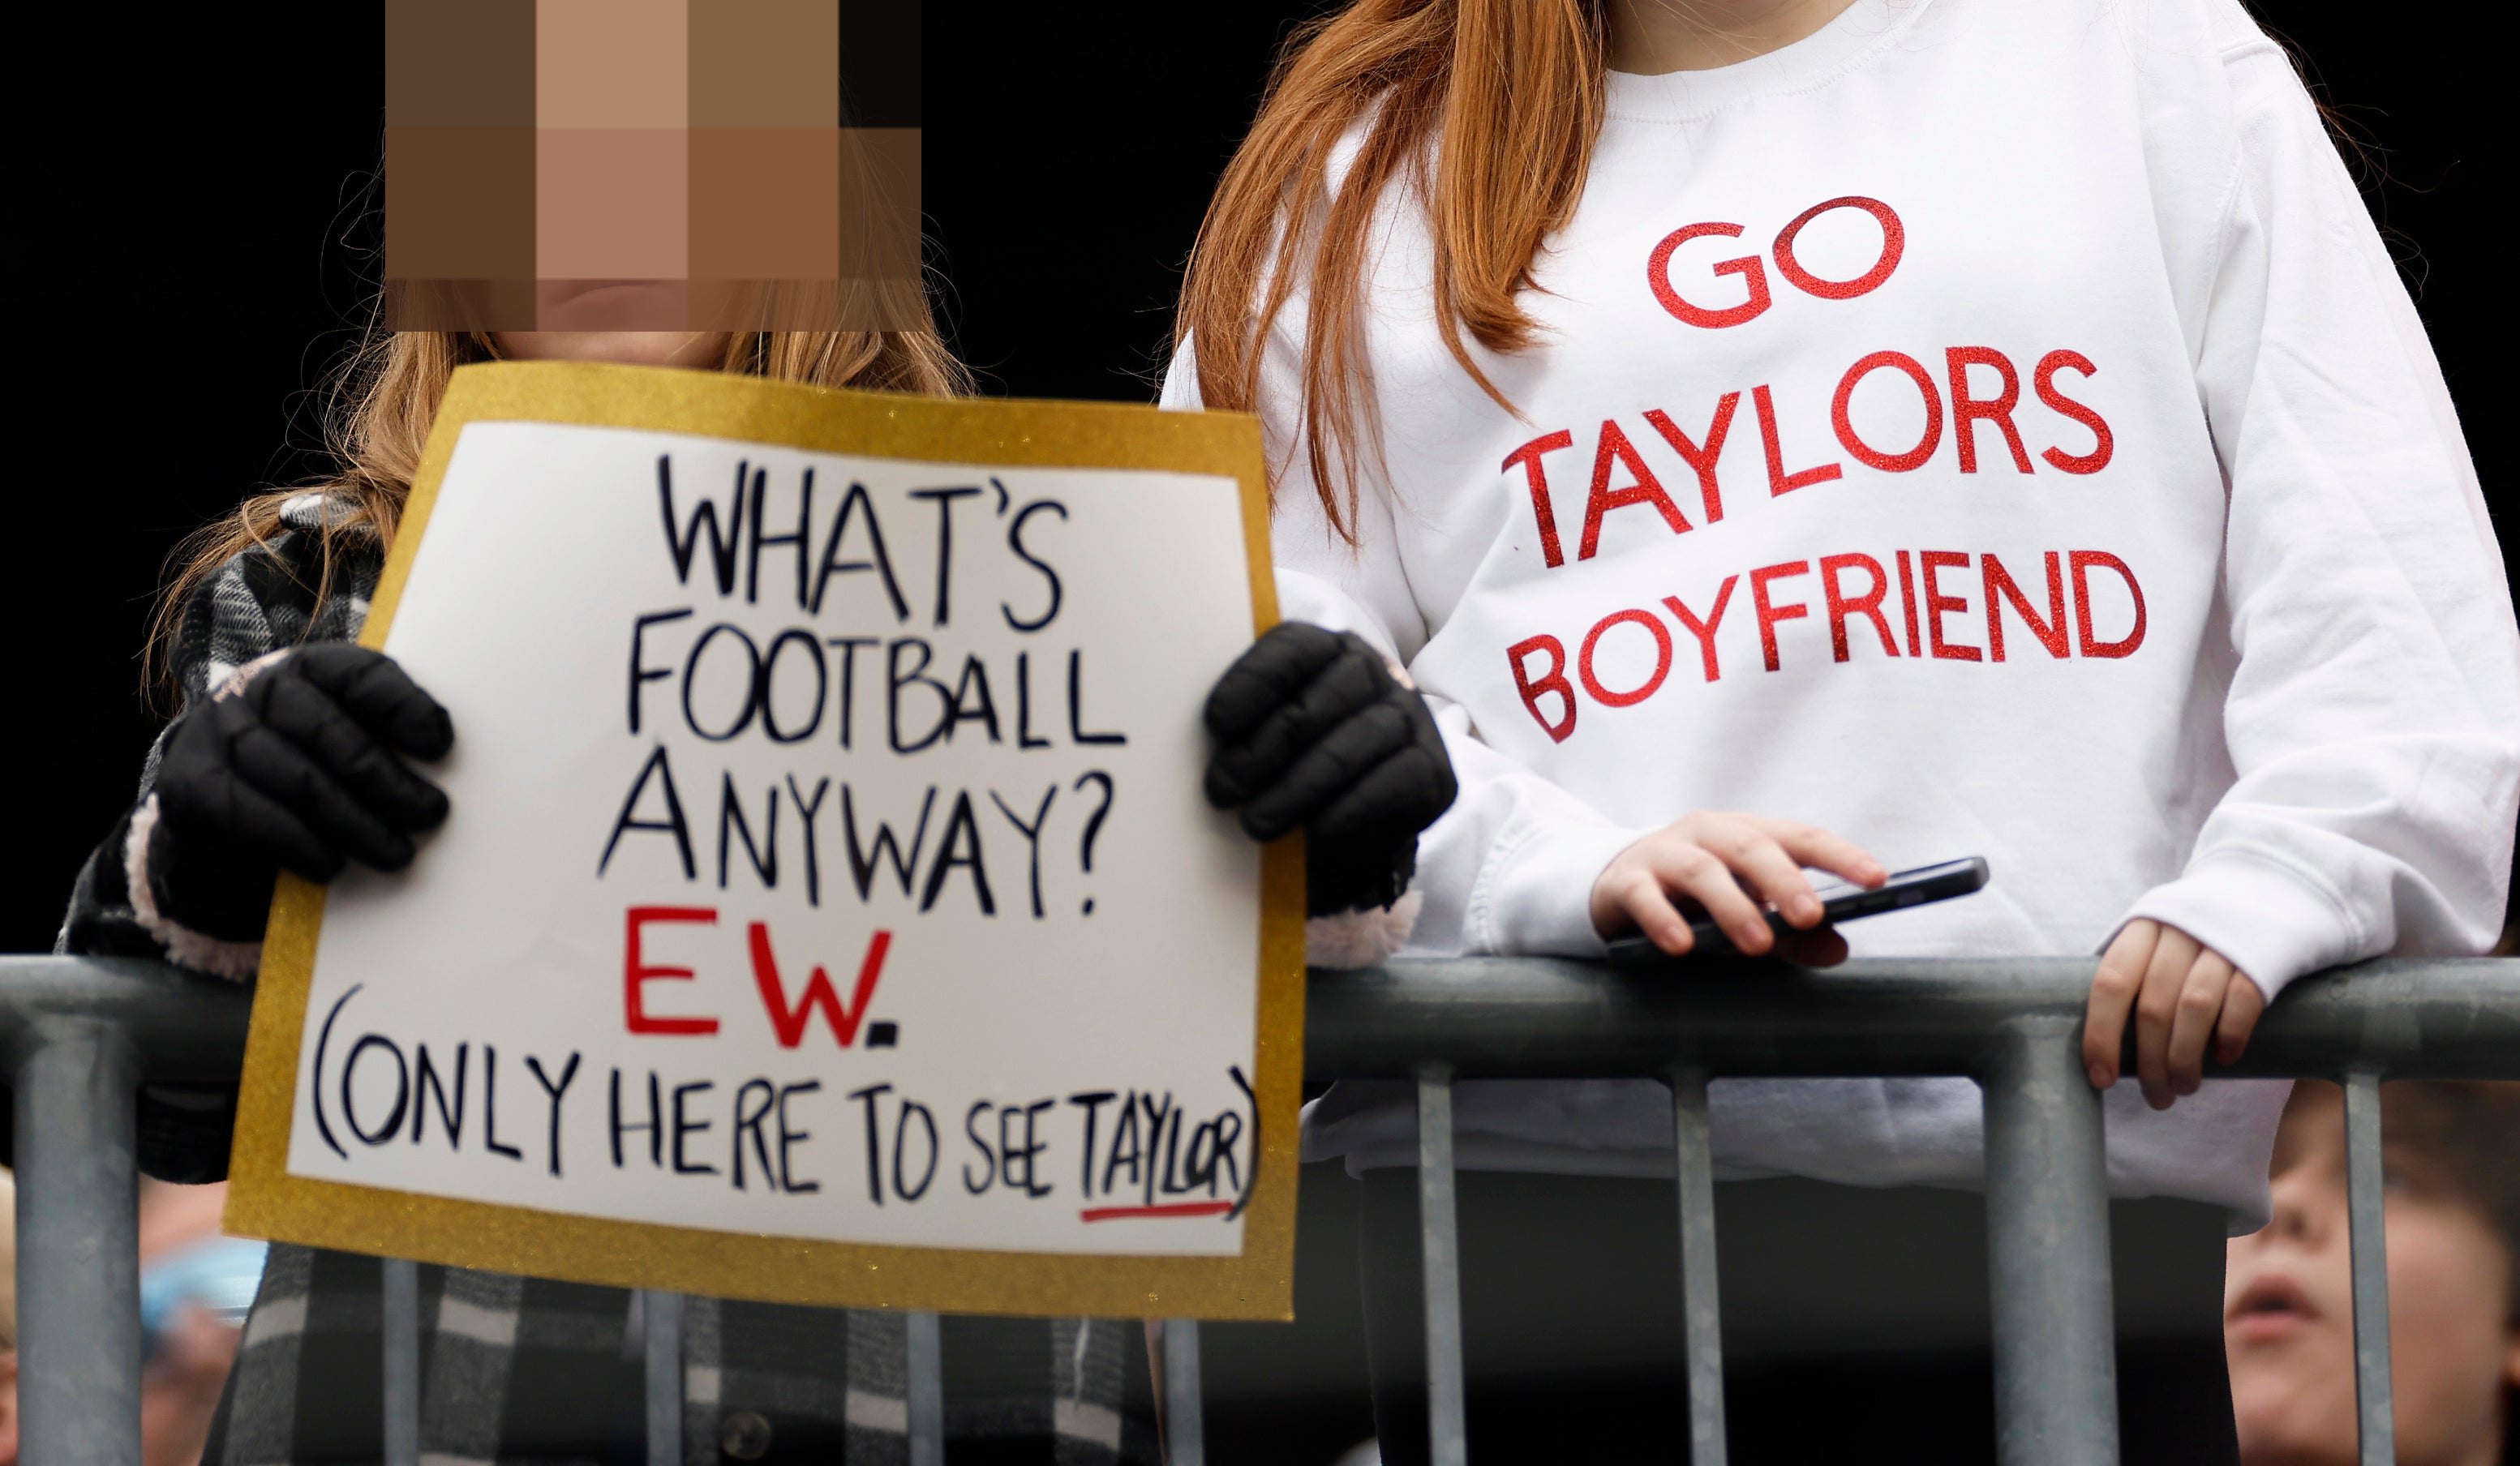 Close-up of someone holding the sign &quot;What&#x27;s football anyway? EW (only here to see Taylor)&quot; and someone wearing a &quot;Go Taylors boyfriend&quot; sweatshirt